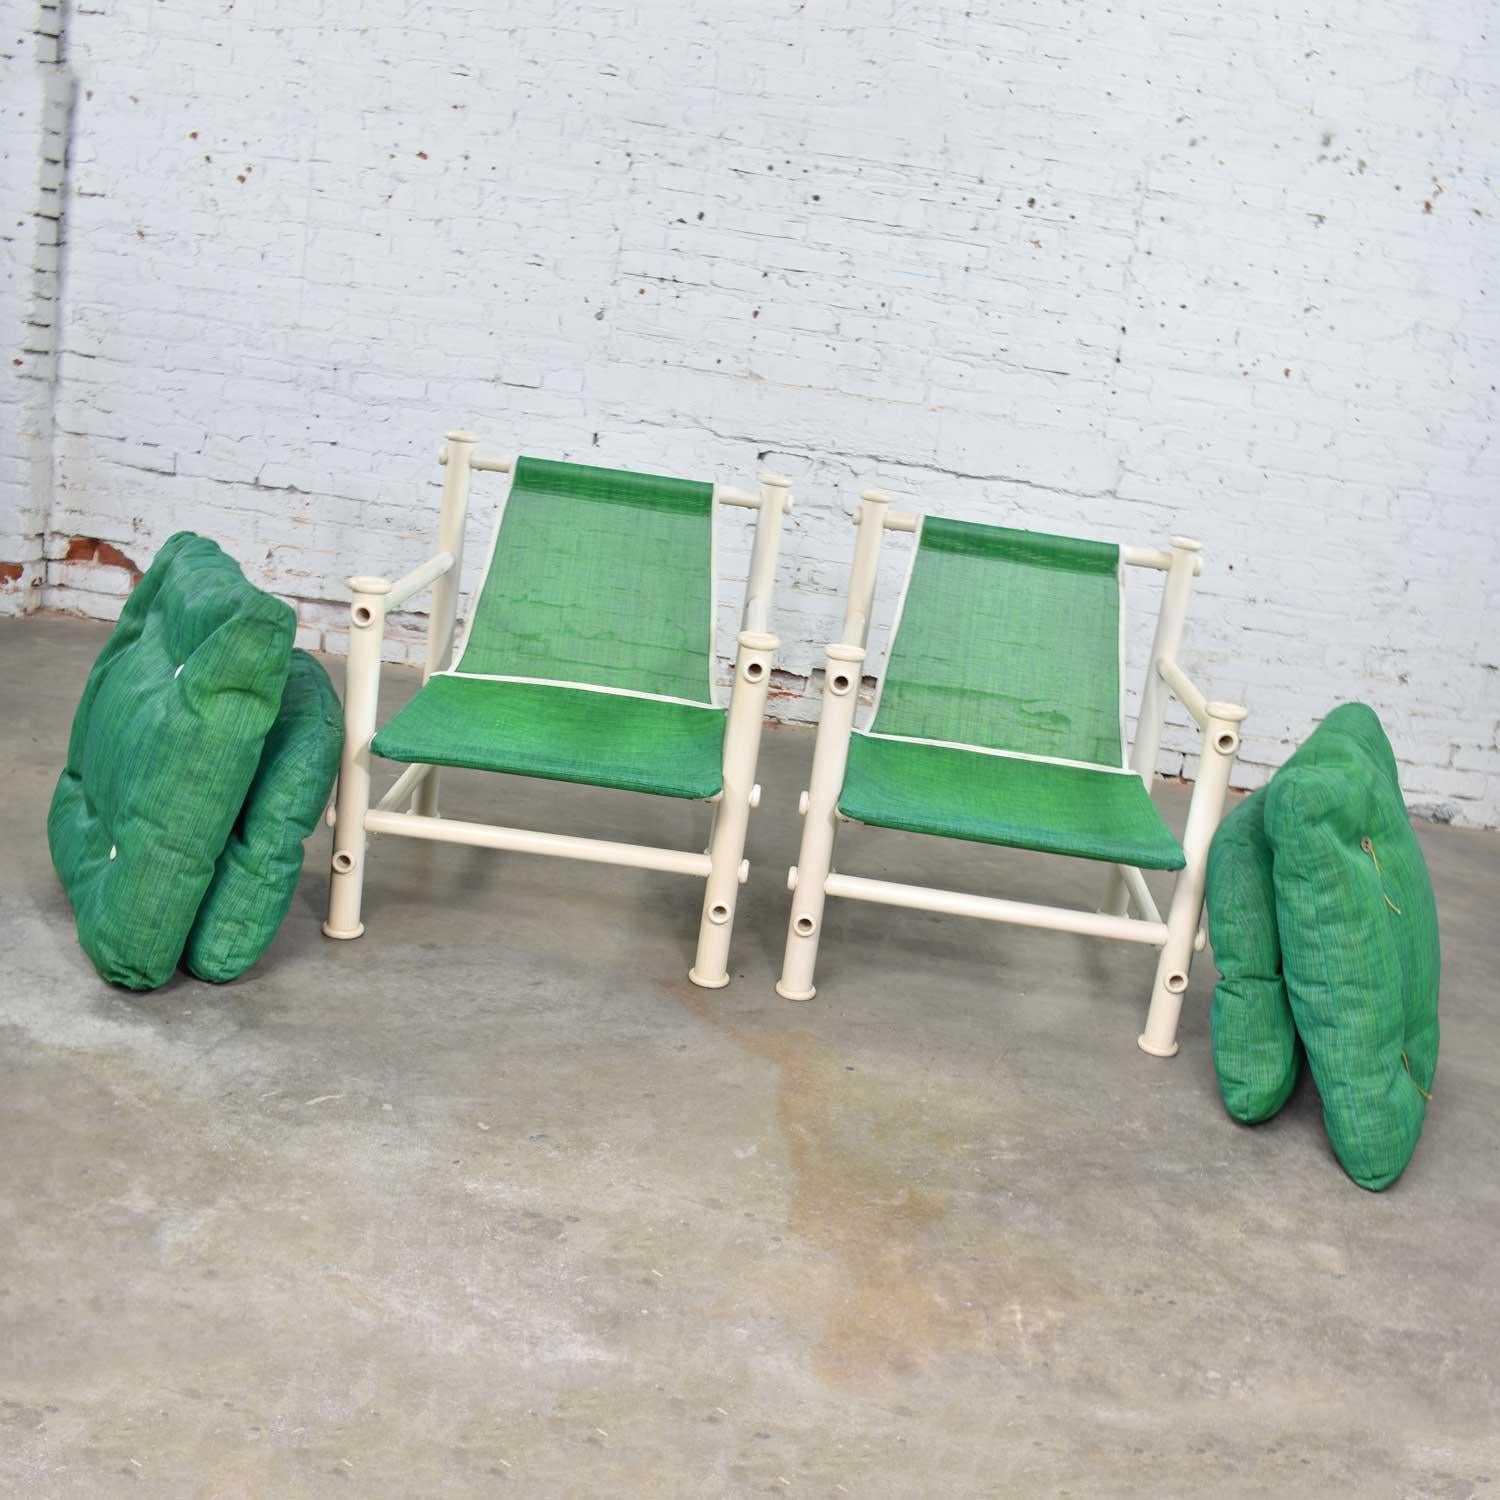 2 Jerry Johnson Landes PVC Outdoor Idyllwild Lounge Chairs Green Mesh Upholstery In Good Condition For Sale In Topeka, KS